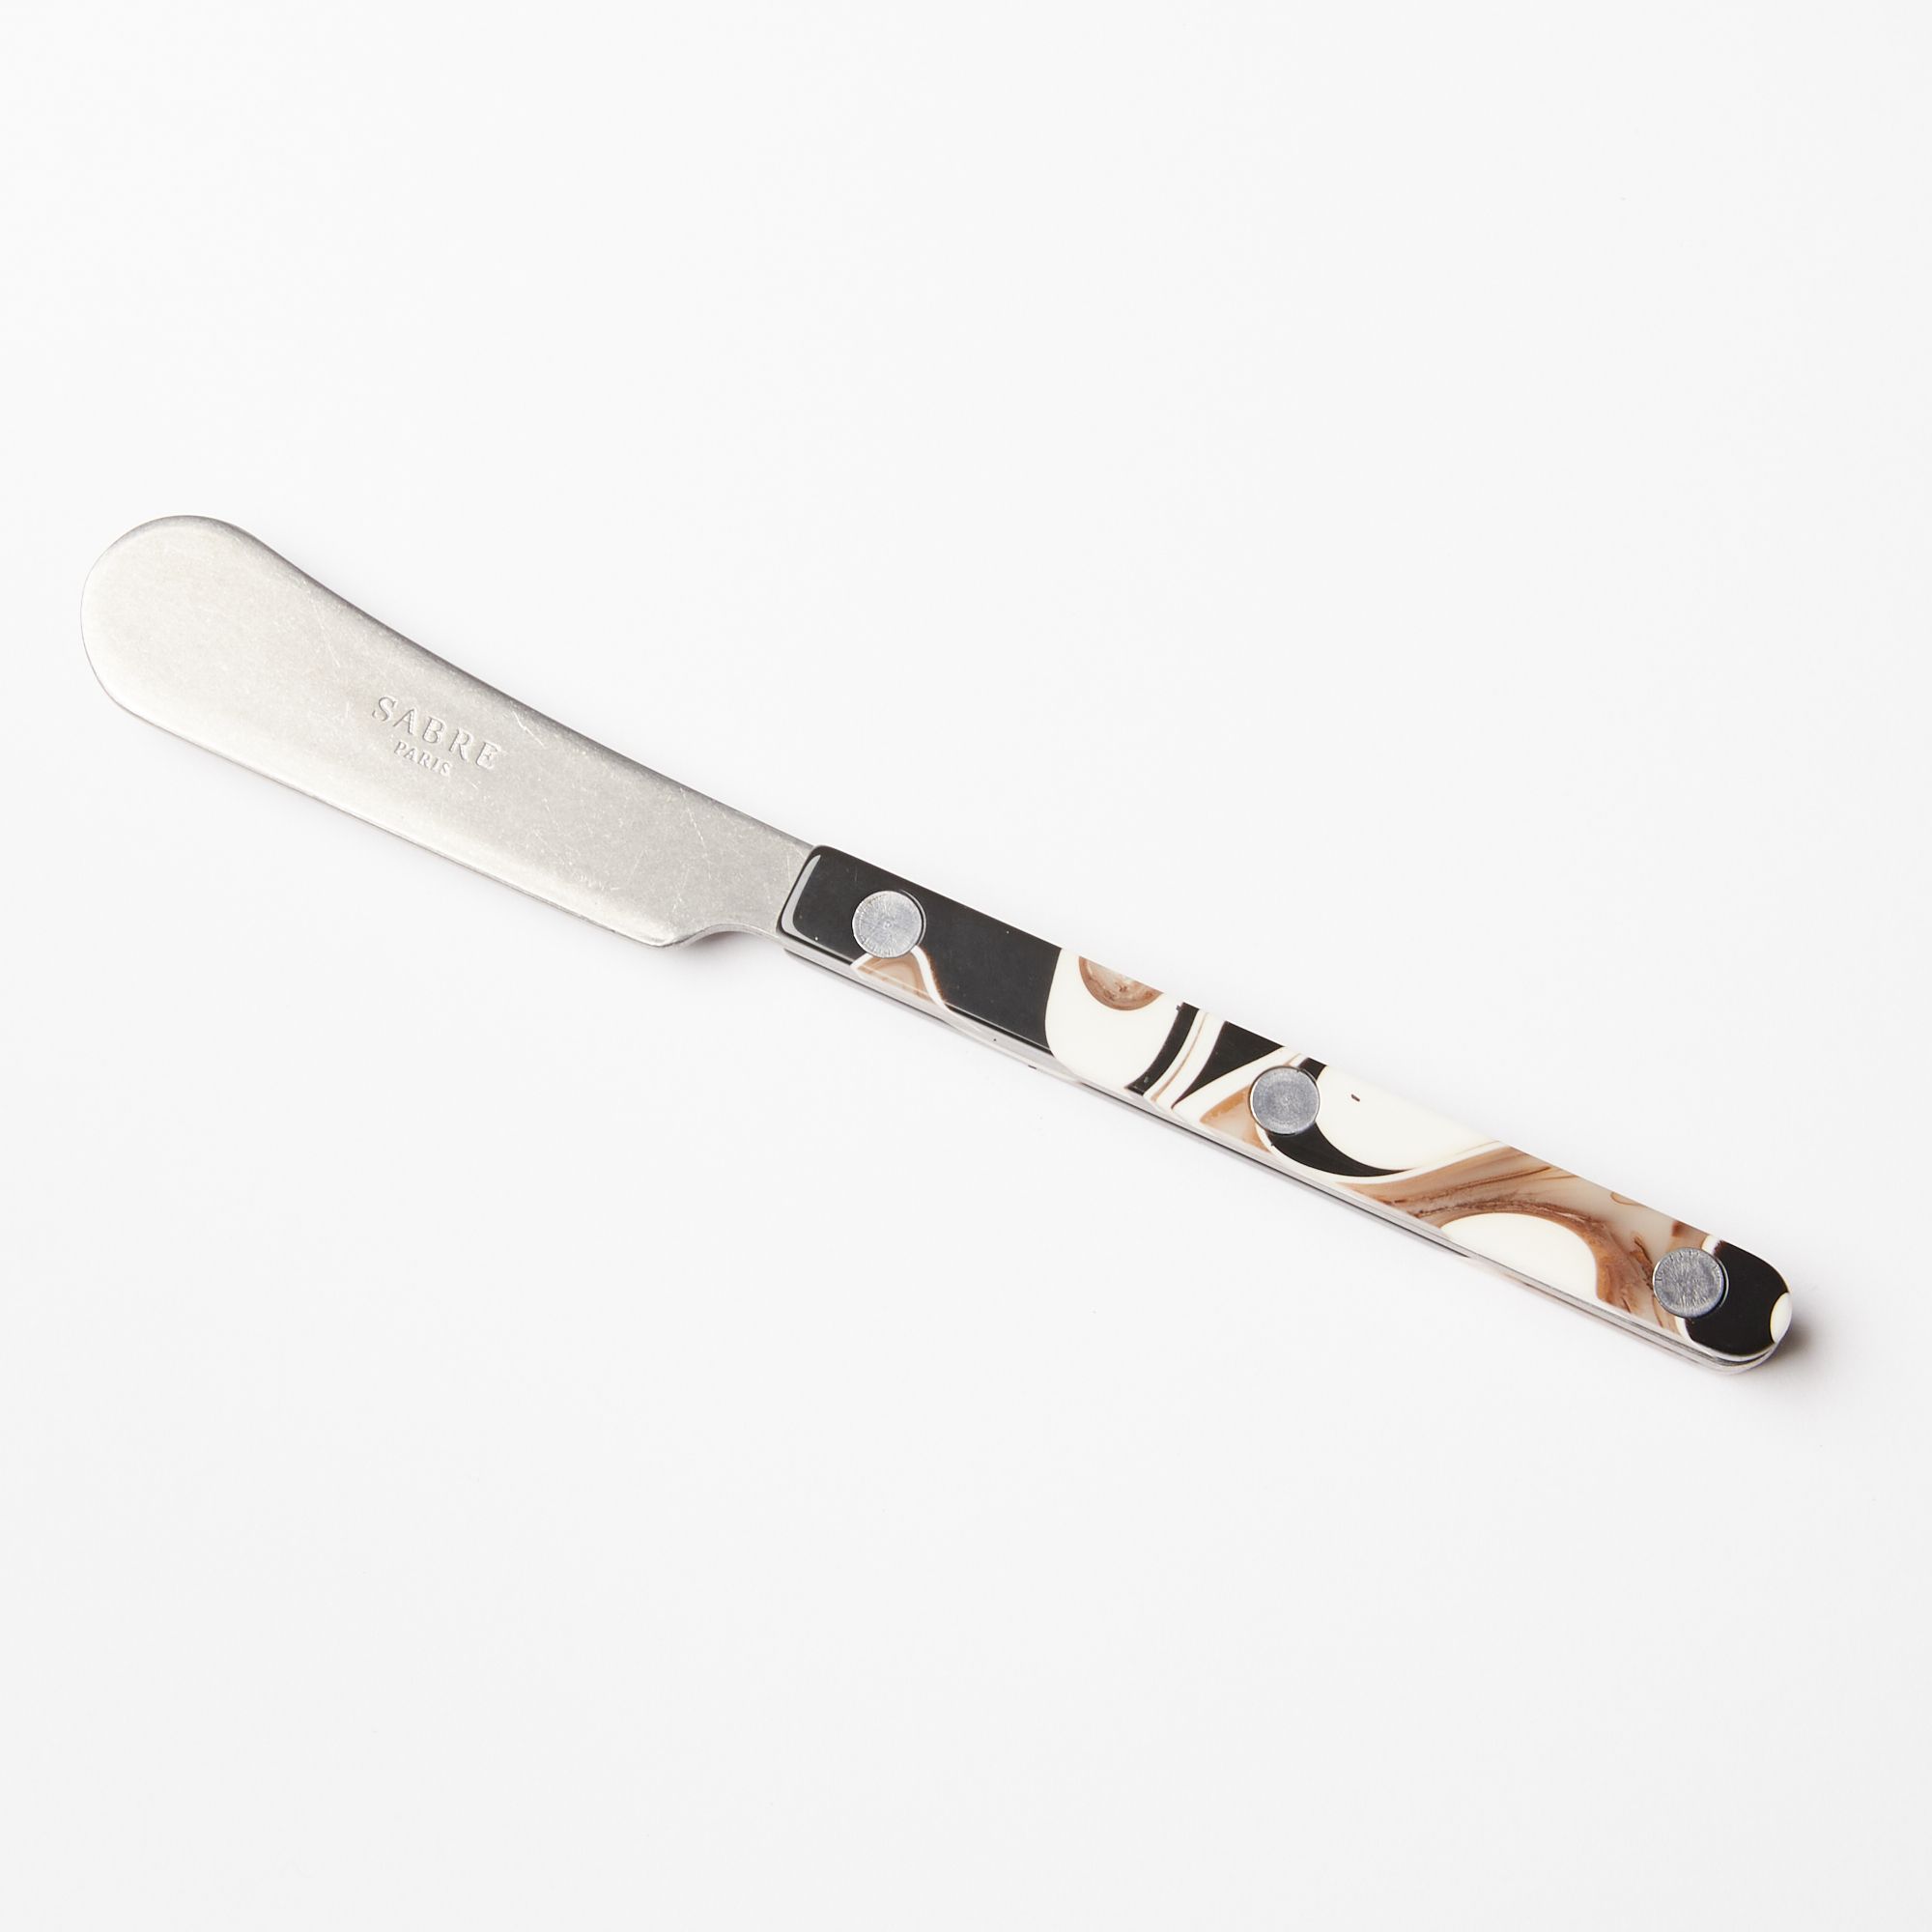 A butter knife with a stainless steel blade and an acrylic black, white, and brown handle